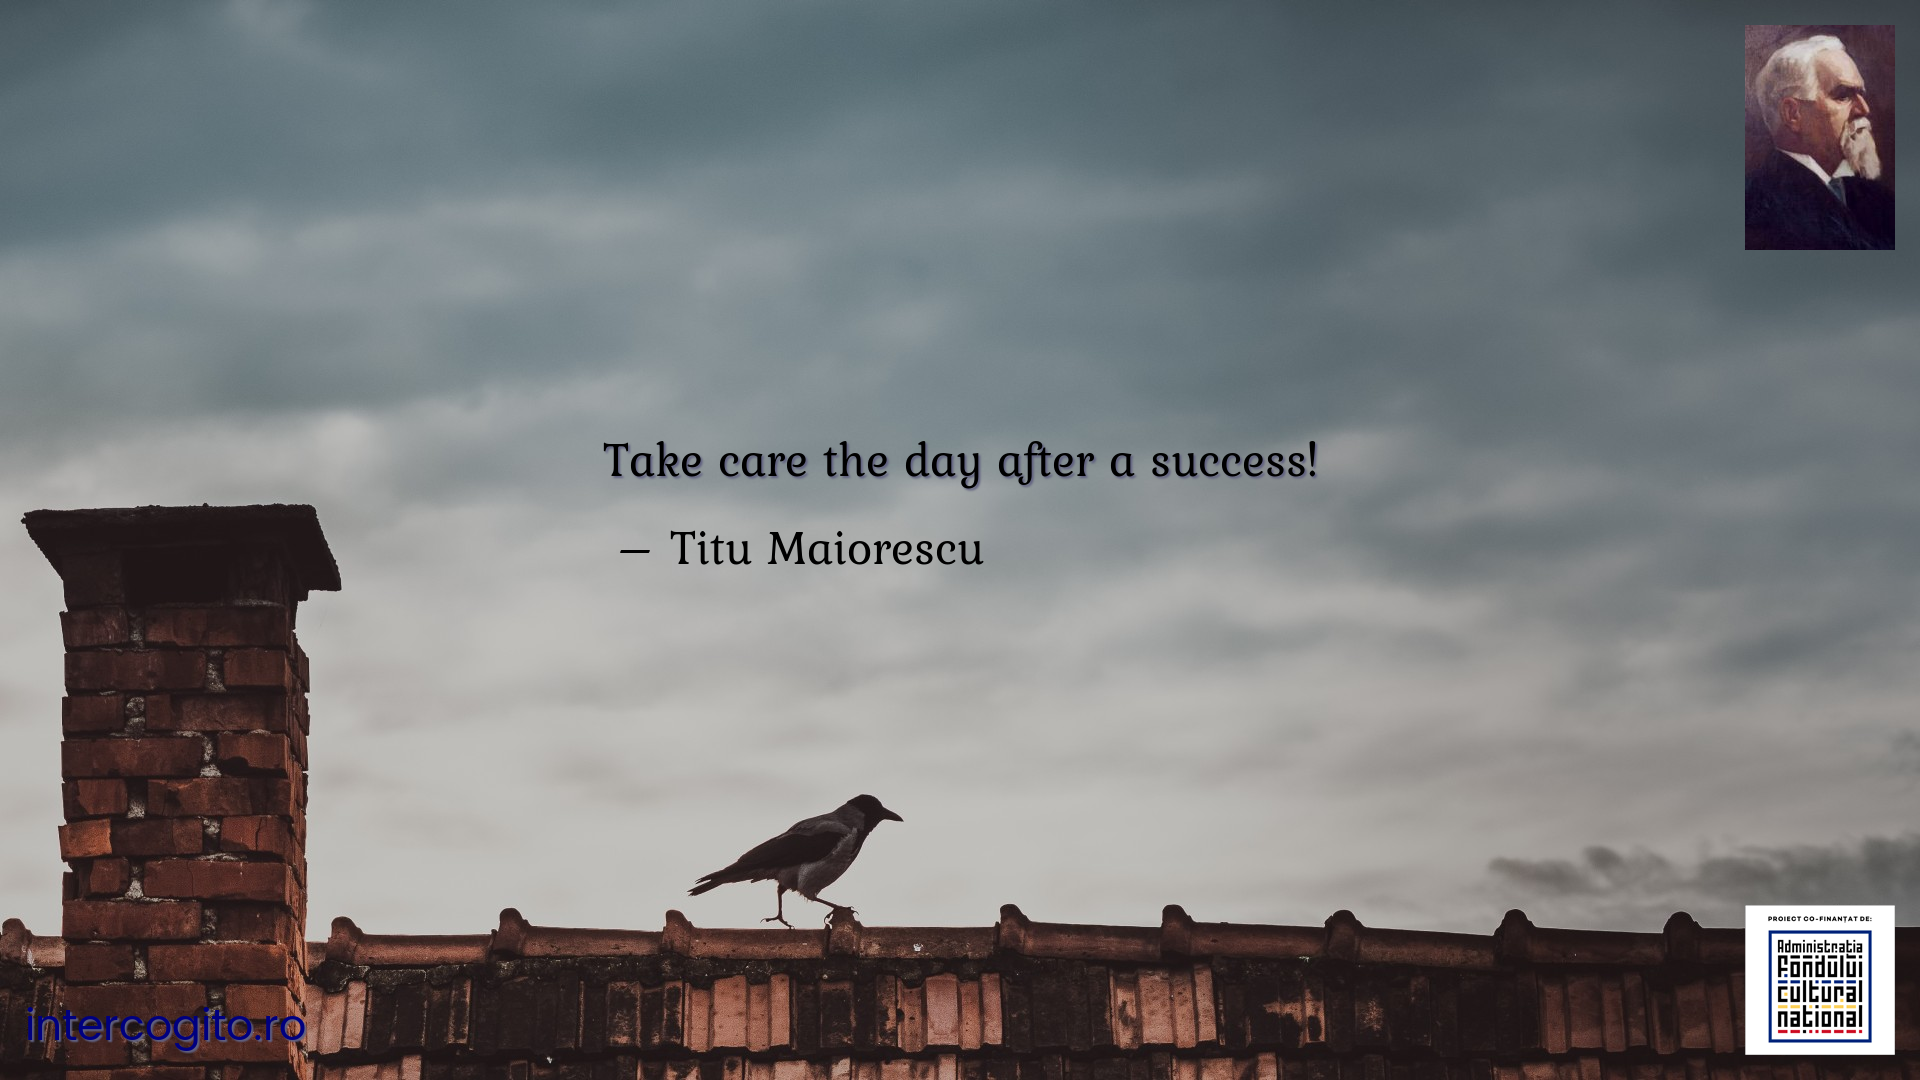 Take care the day after a success!